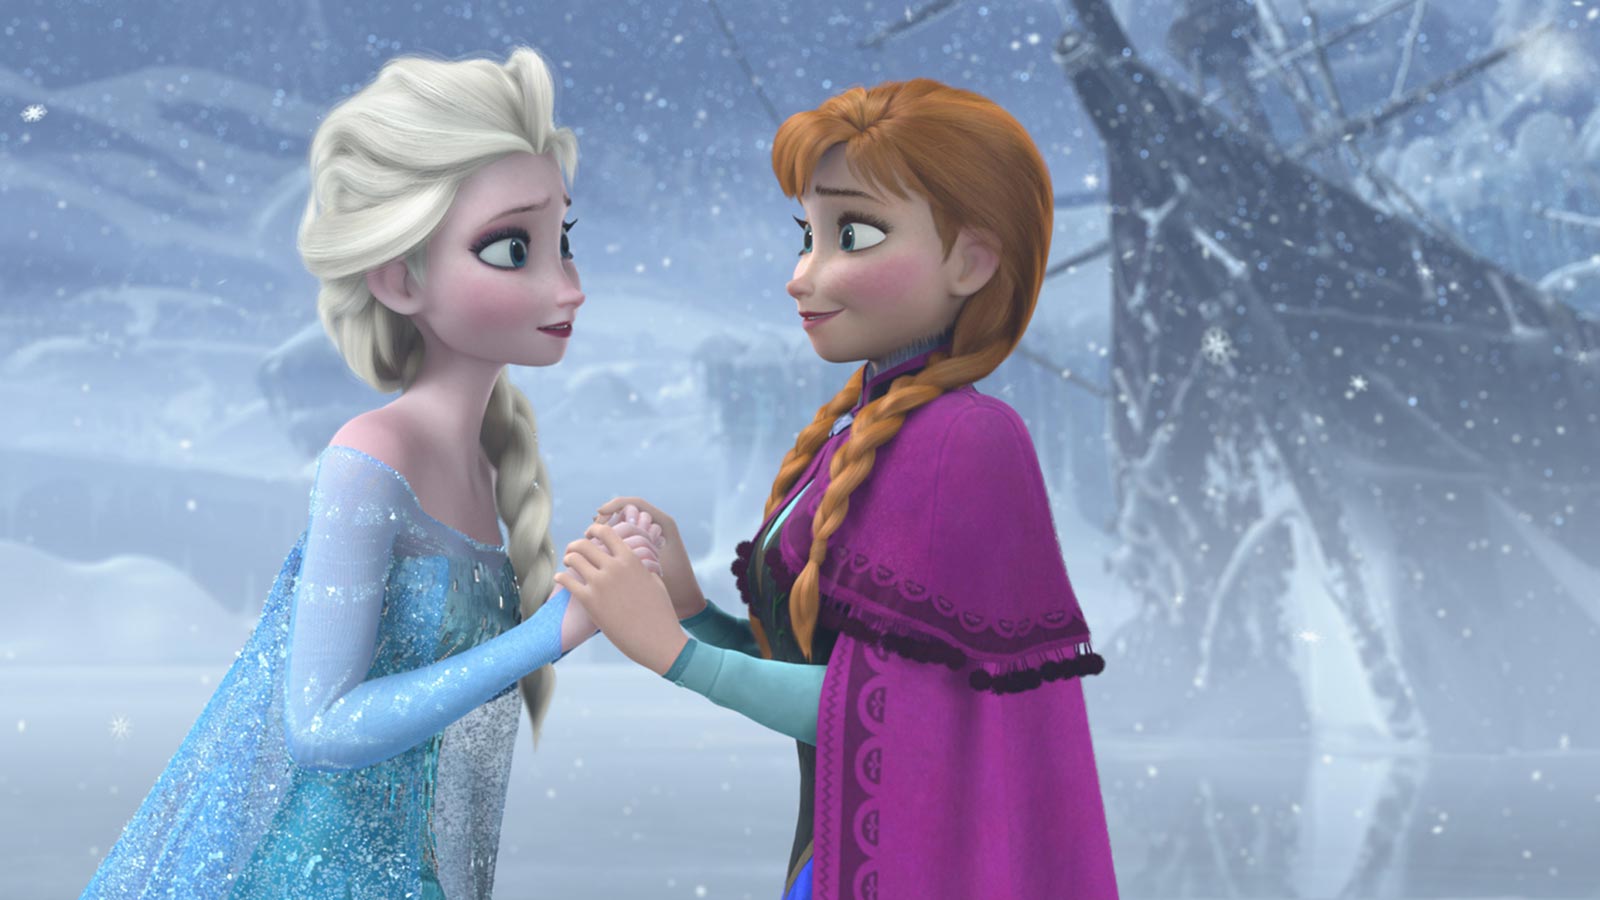 If You’ve Seen 20/39 of the Films That’ve Made Over $1 Billion, You’re a Real Movie Buff Frozen movie